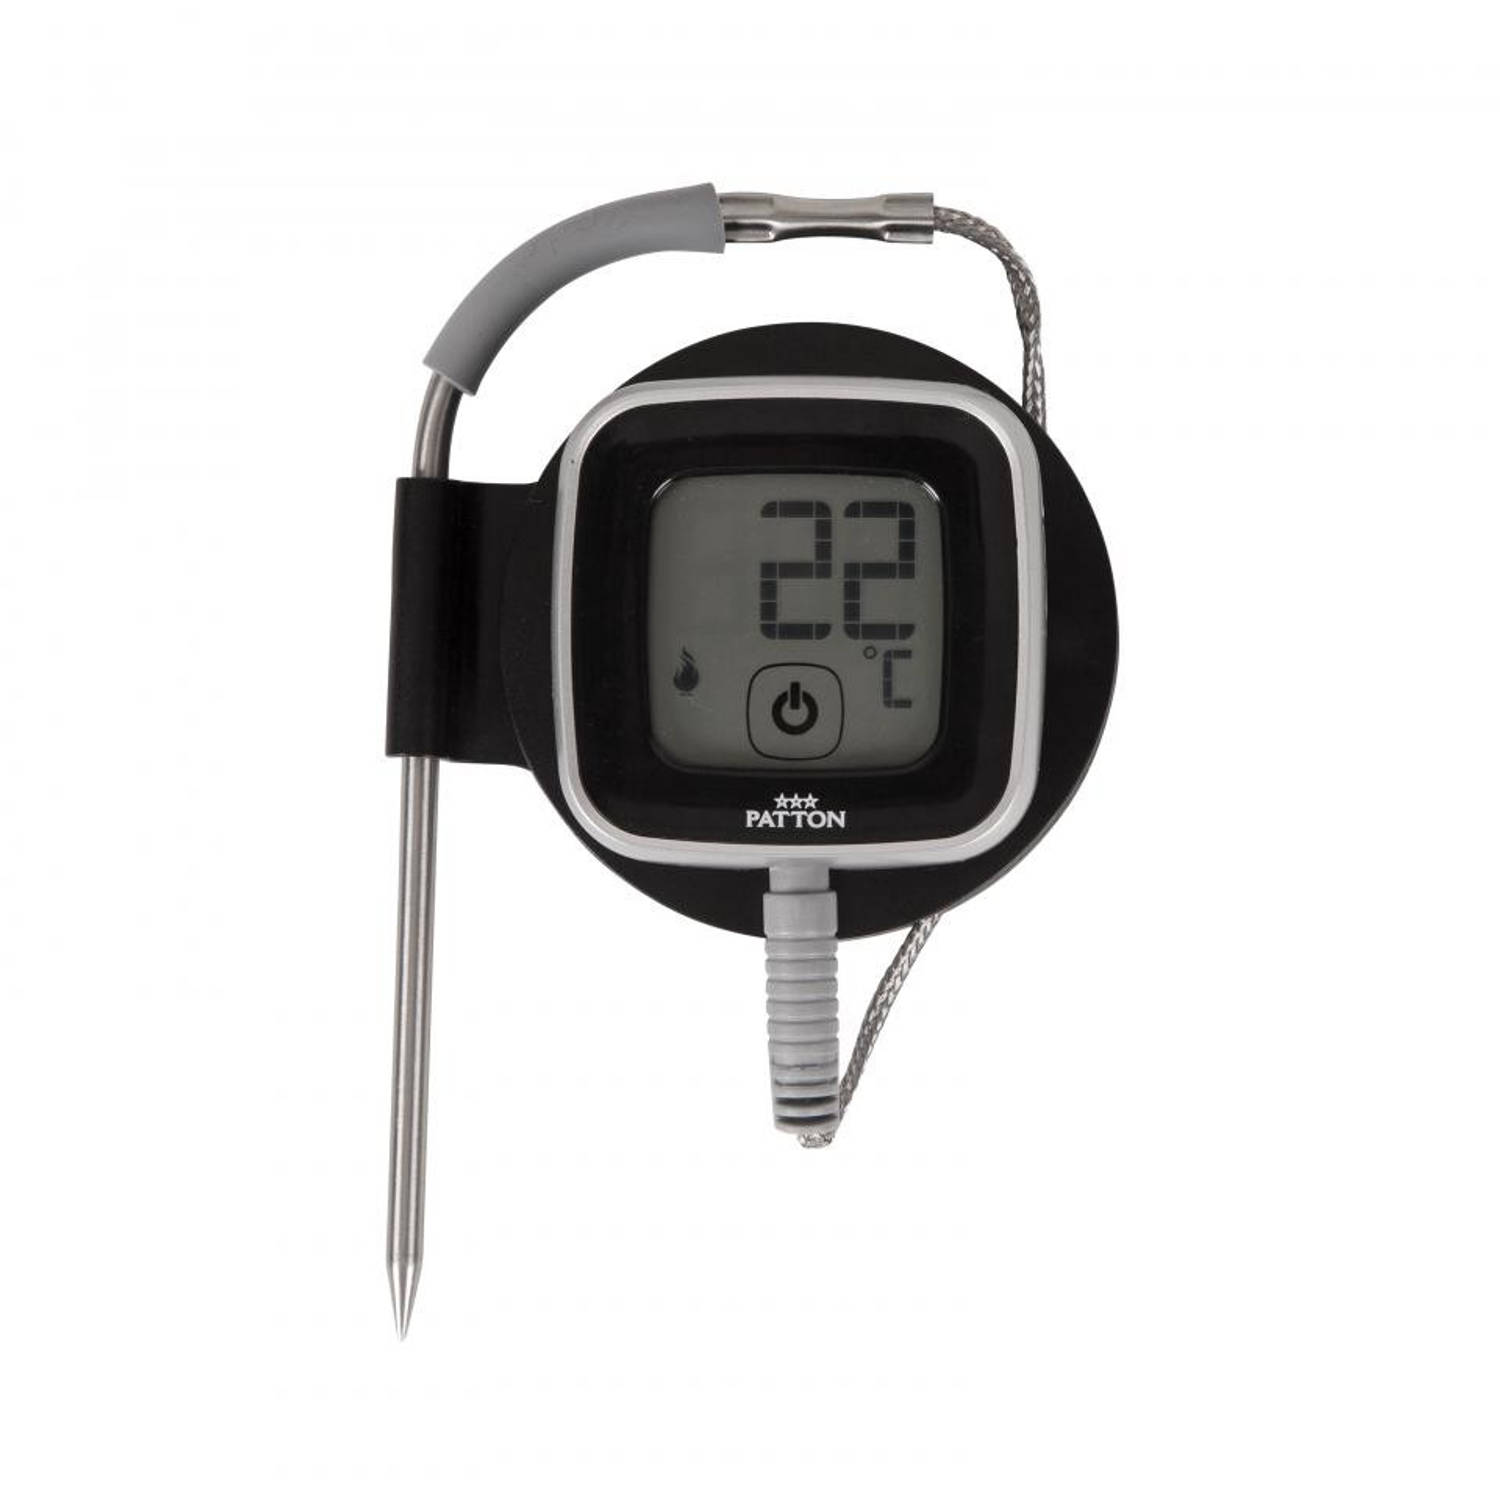 Patton thermometer Blue Tooth Smart